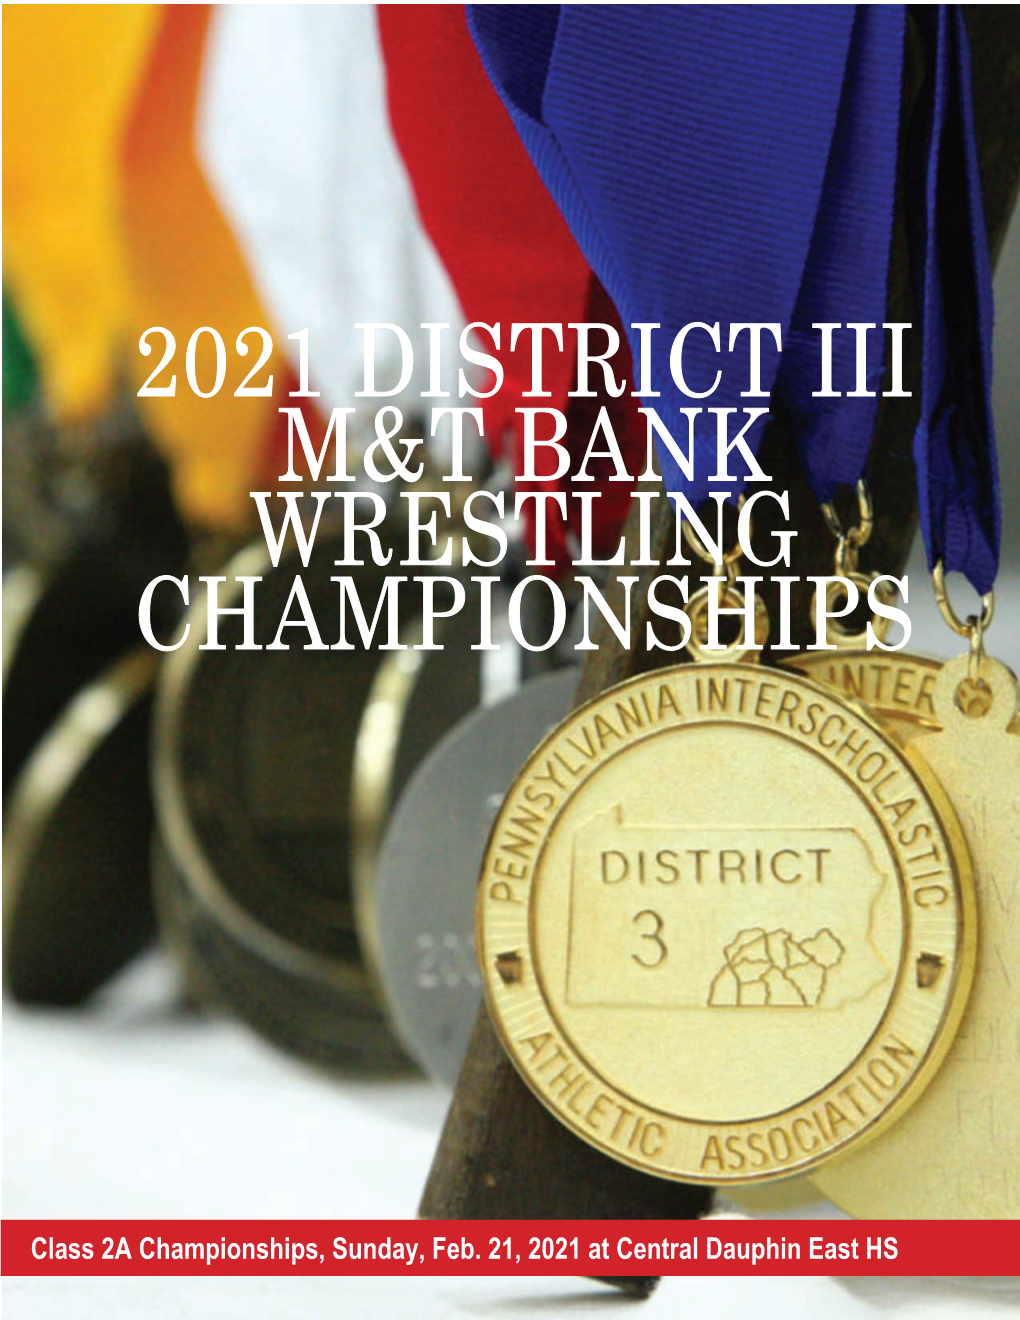 2021 District Iii M&T Bank Wrestling Championships